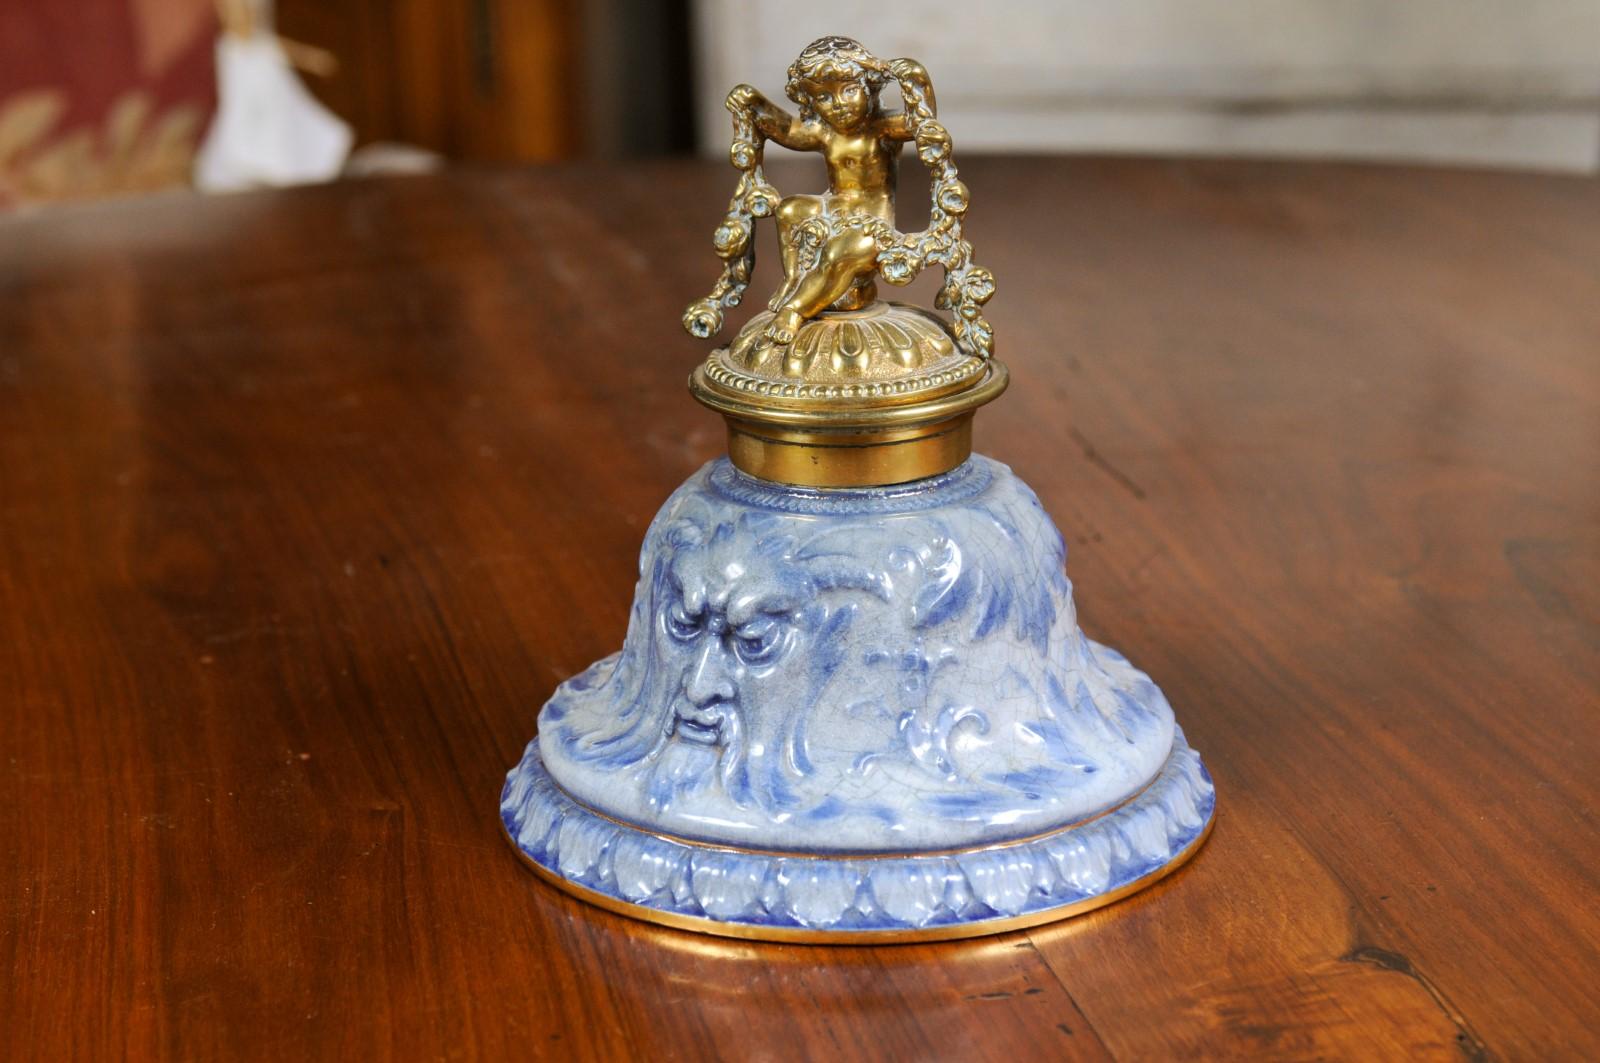 English Victorian Period 19th Century Porcelain Inkwell with Brass Putto Motif For Sale 2